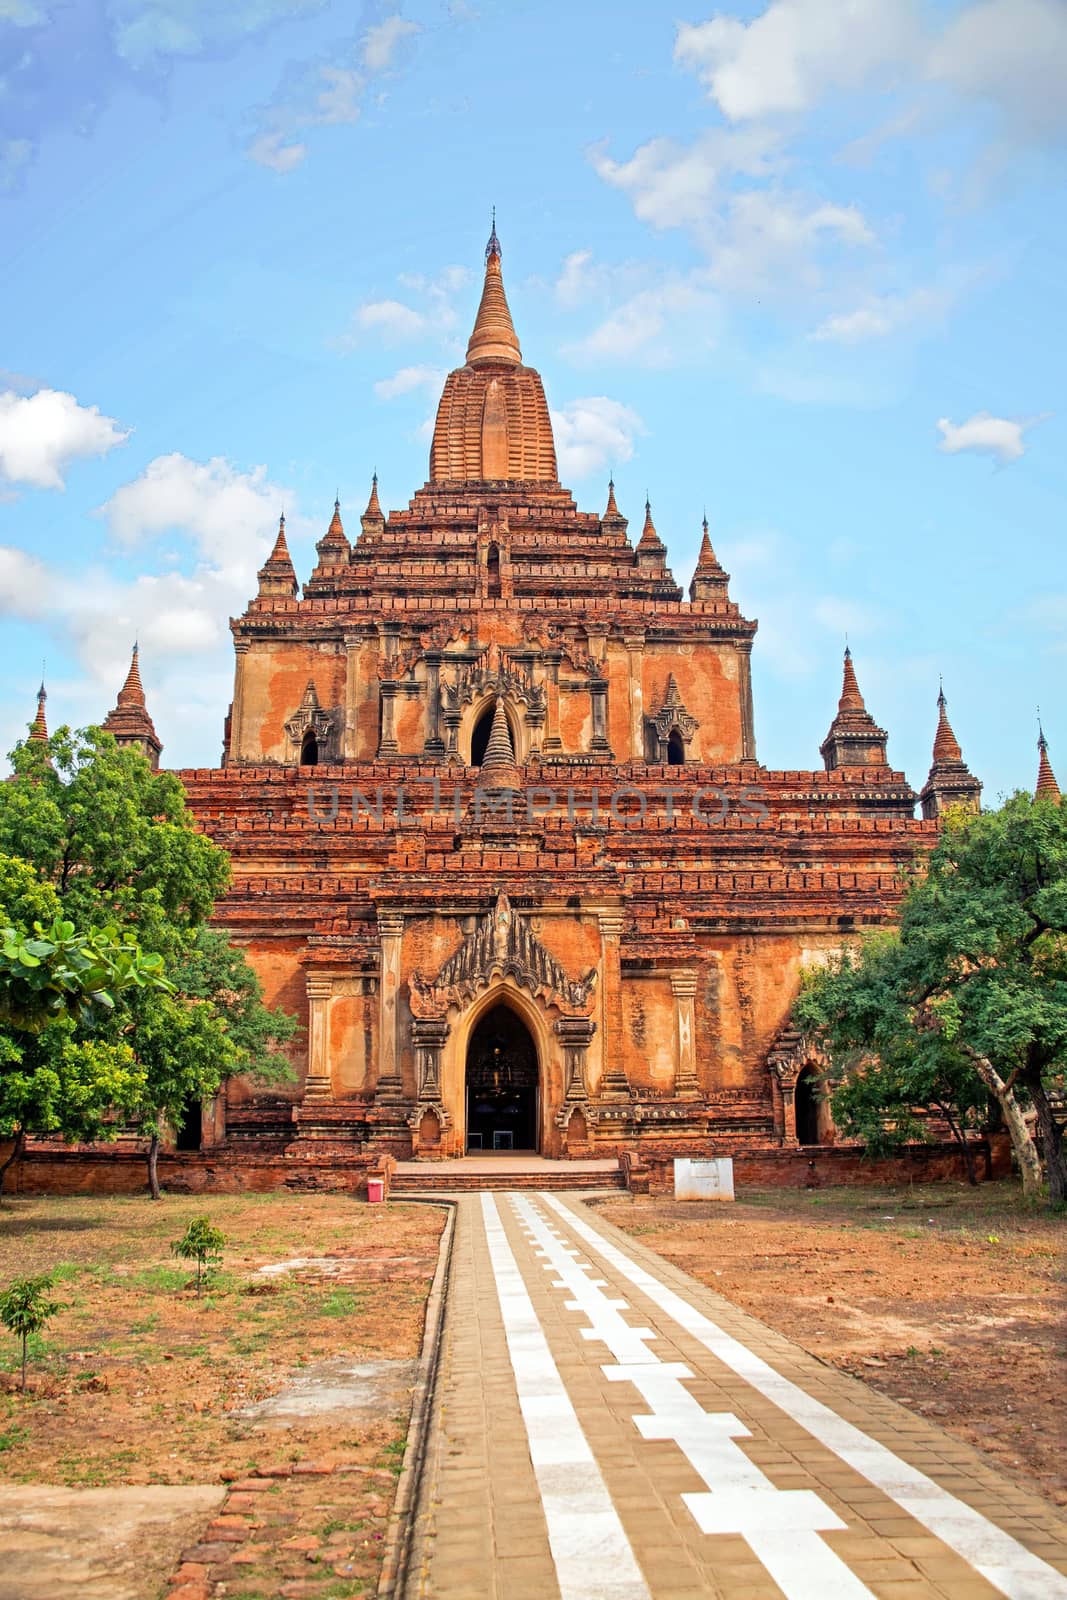 The Sulamani Temple in Bagan, Myanmar by devy